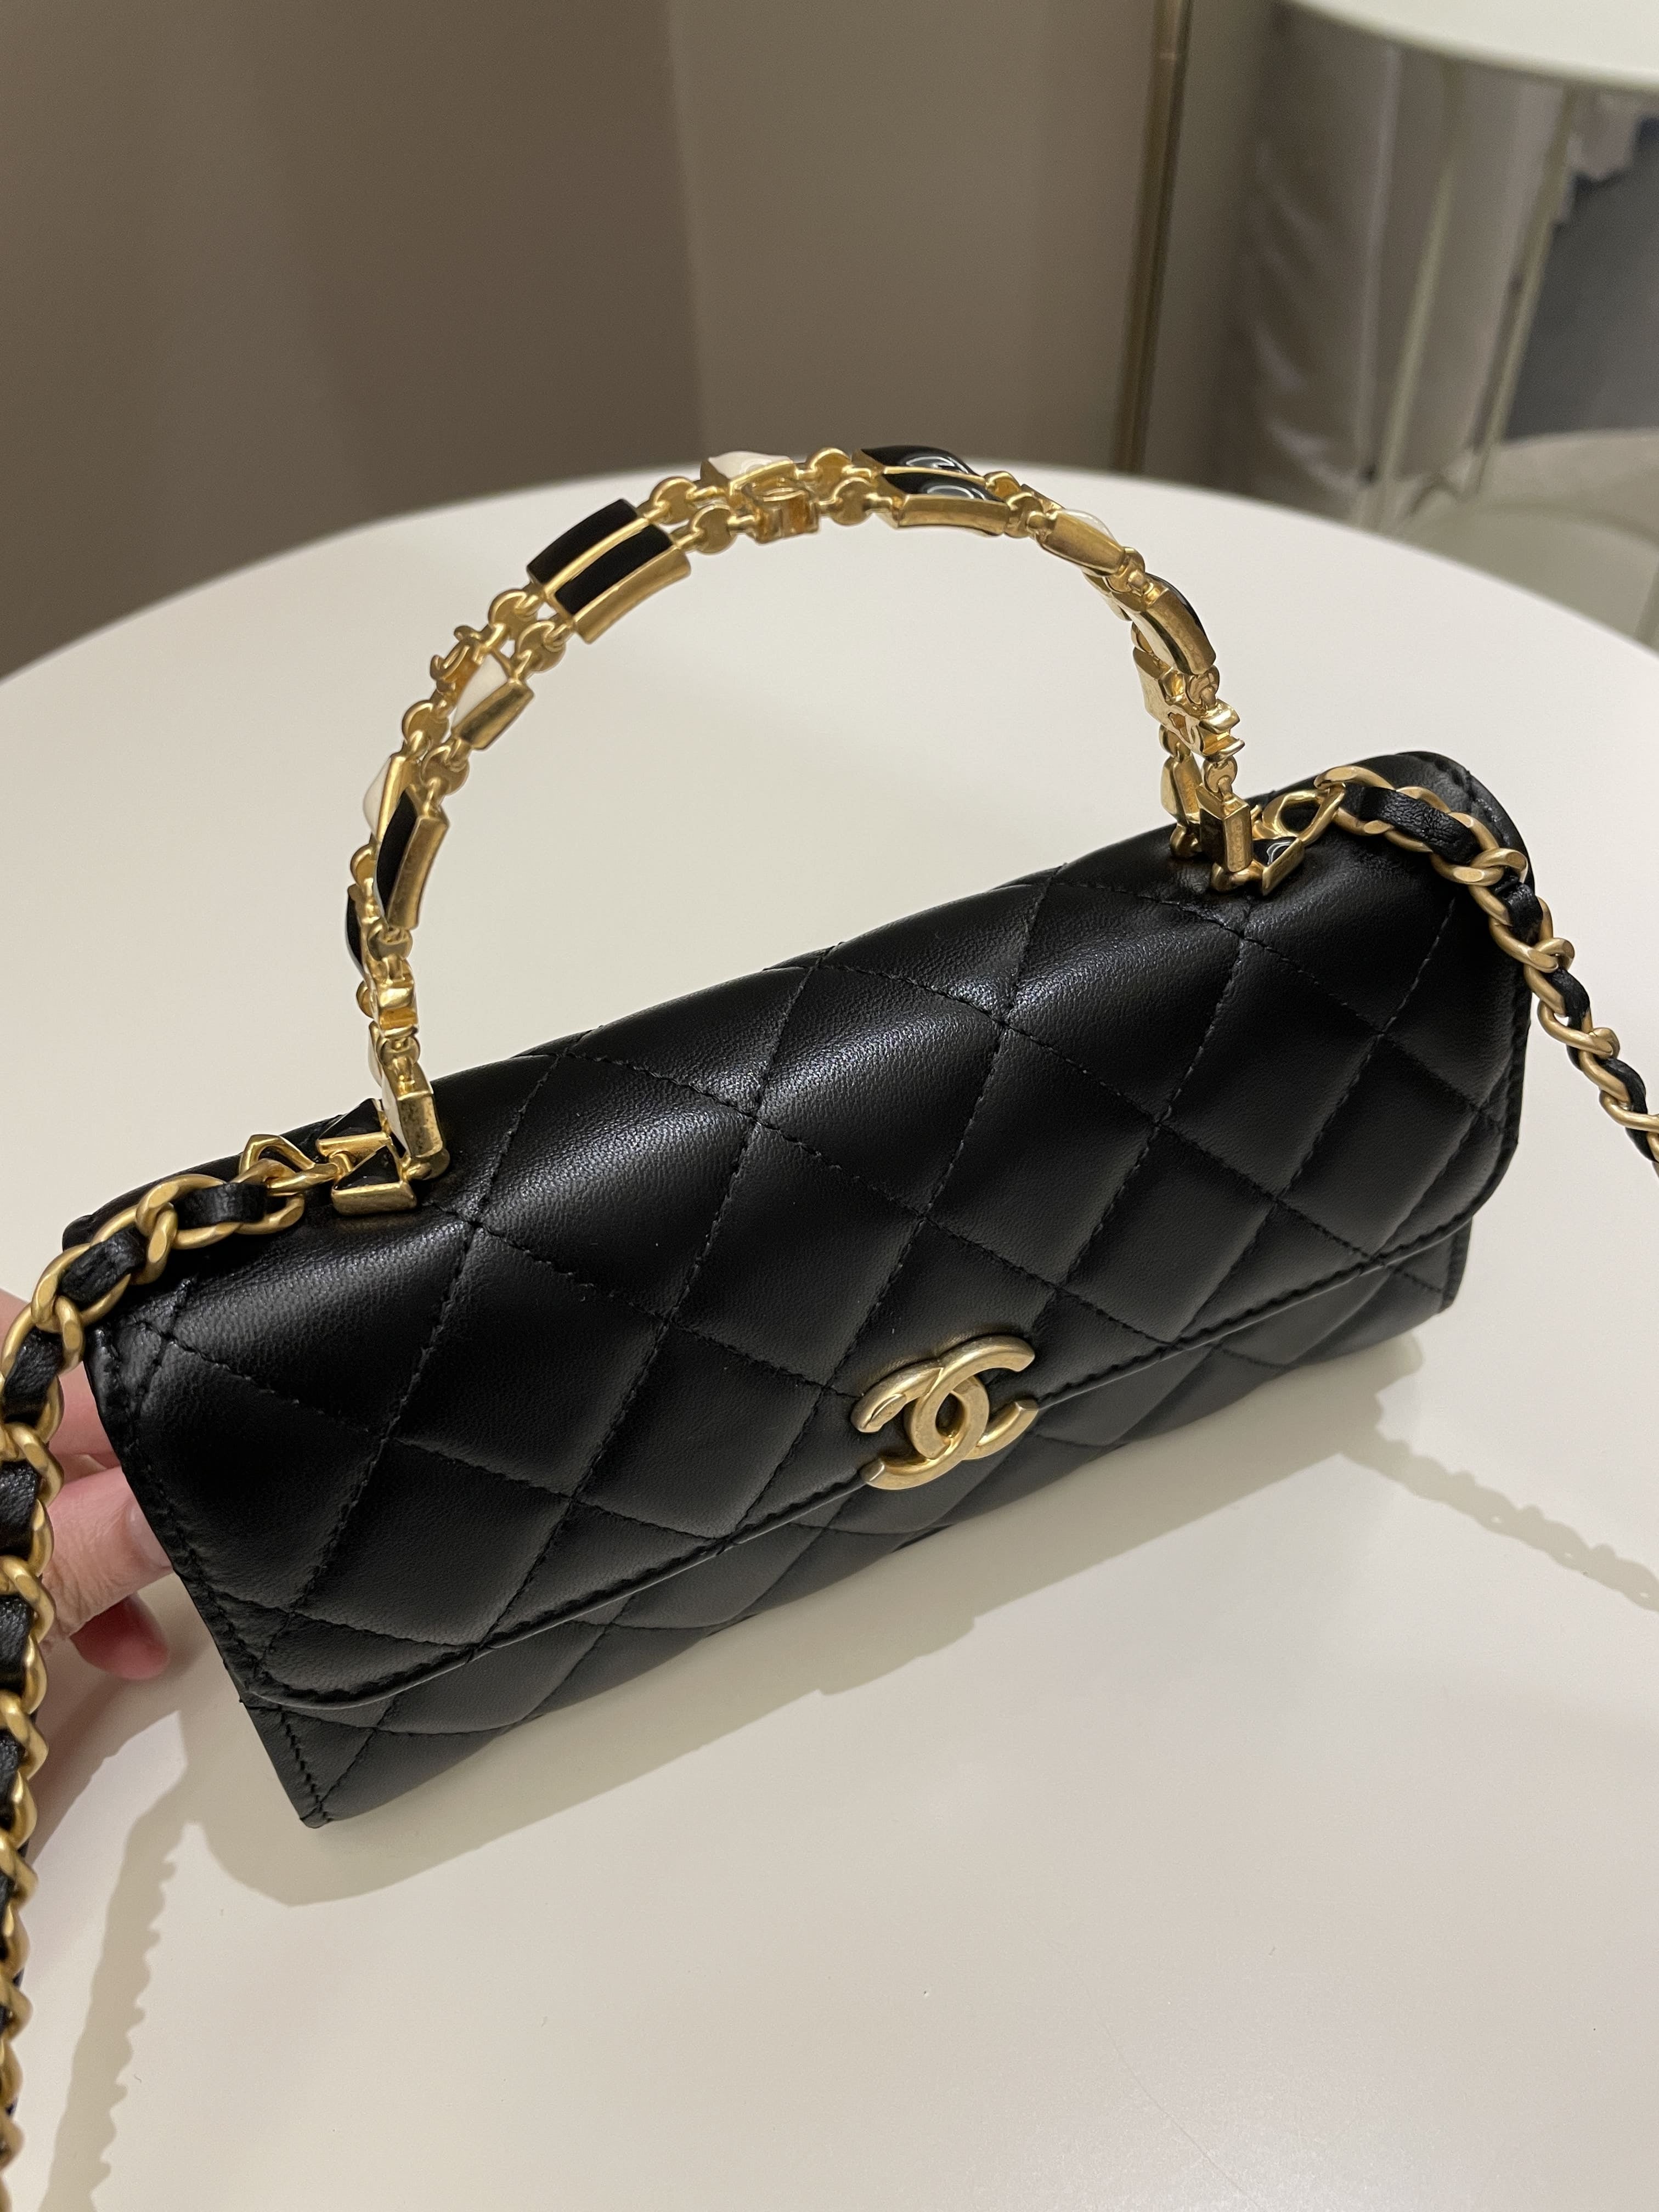 Chanel 22B Quilted Top Handle Flap Bag Black Lambskin